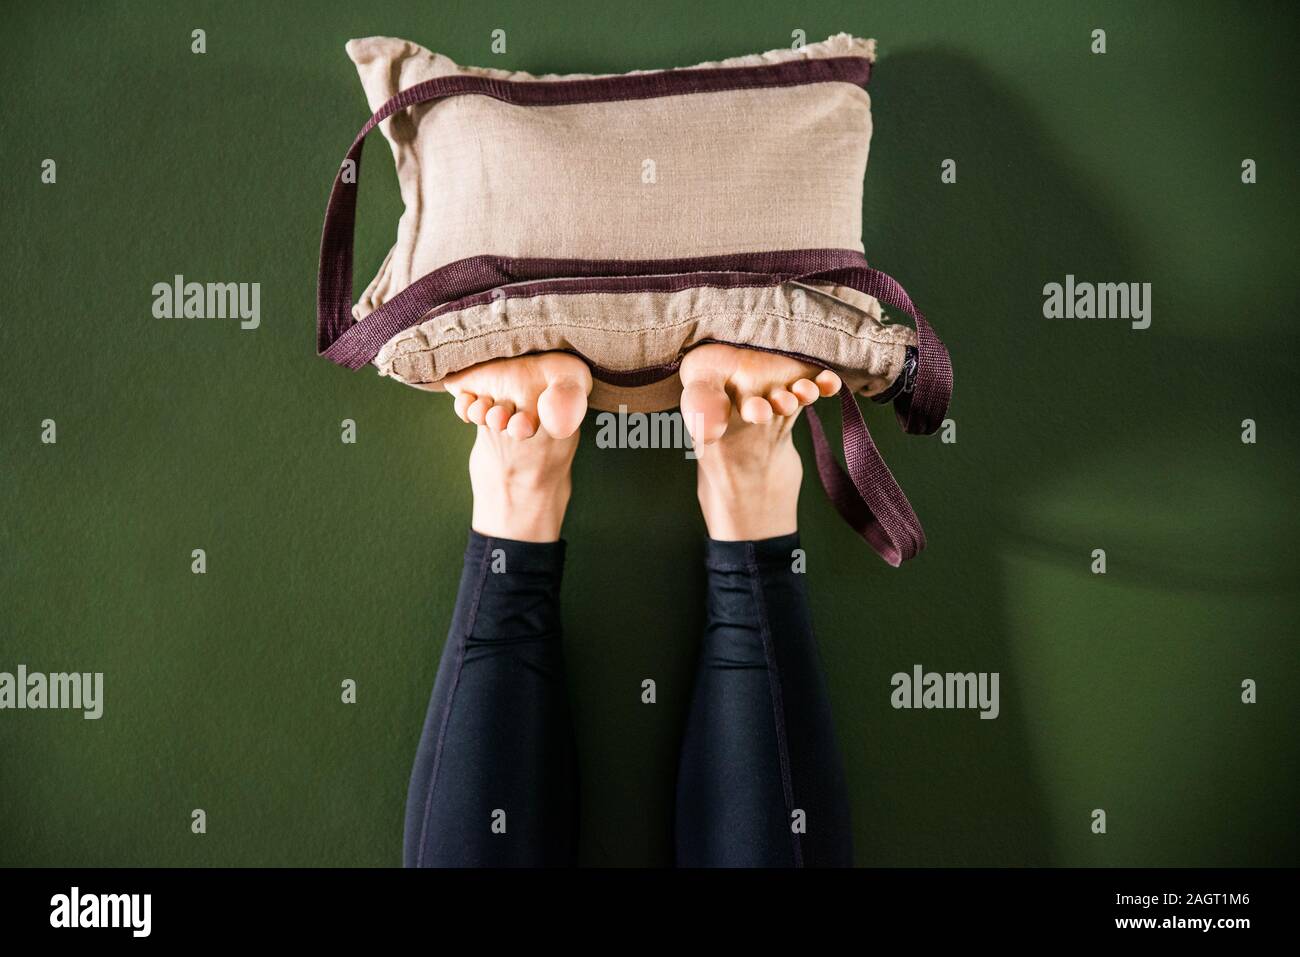 Sand Bag Exercise High Resolution Stock Photography And Images Alamy